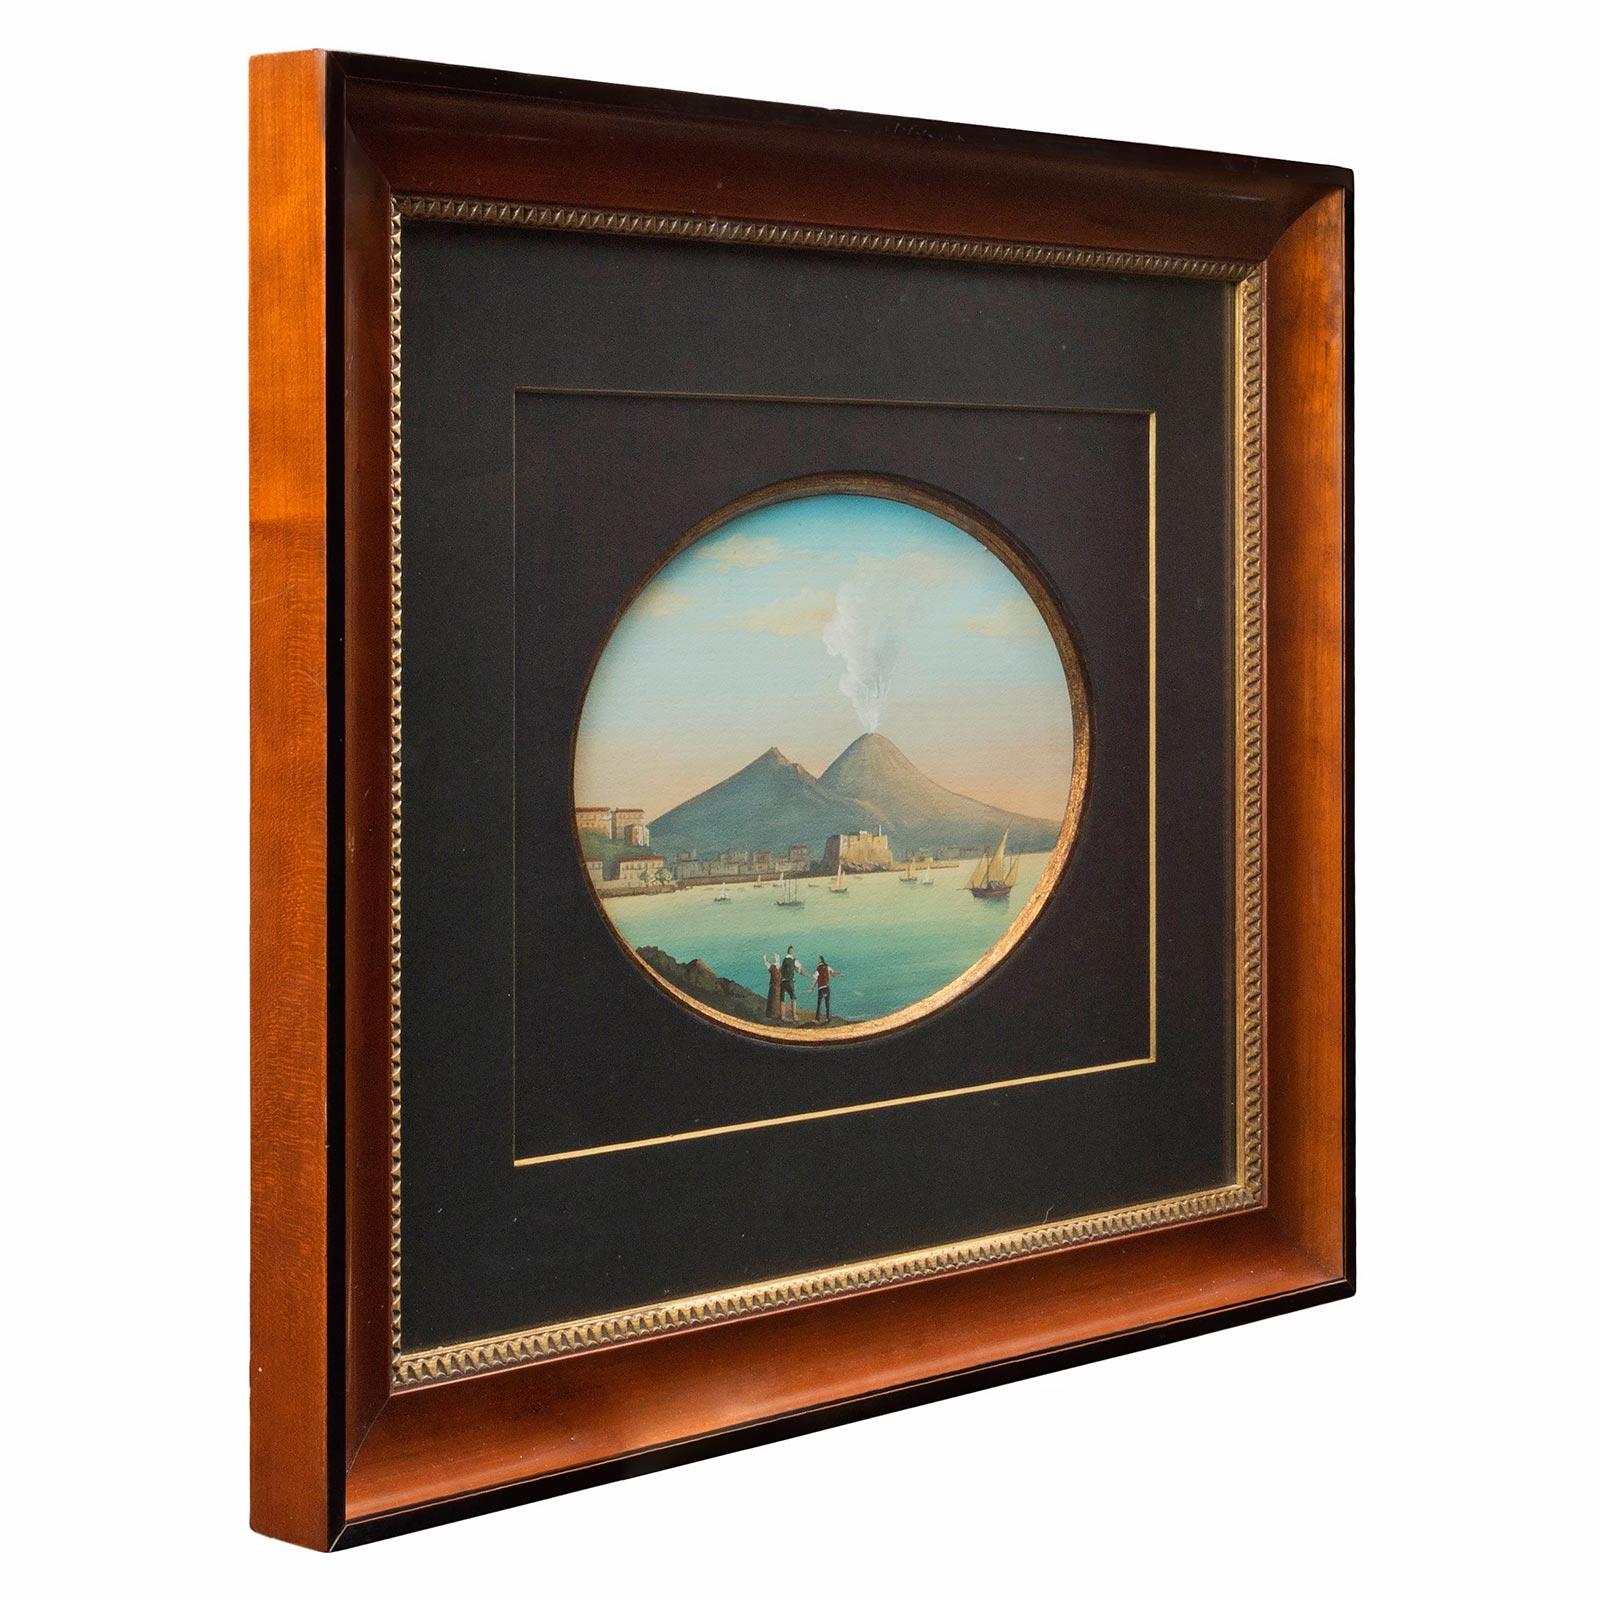 A wonderful pair of Italian 19th century gouaches depicting scenes of Naples, Italy. Each with exquisite and vibrant colors within ebony and mahogany frames with a gilt inner band. One gouache is of the Vesuvius volcano while the other is of the